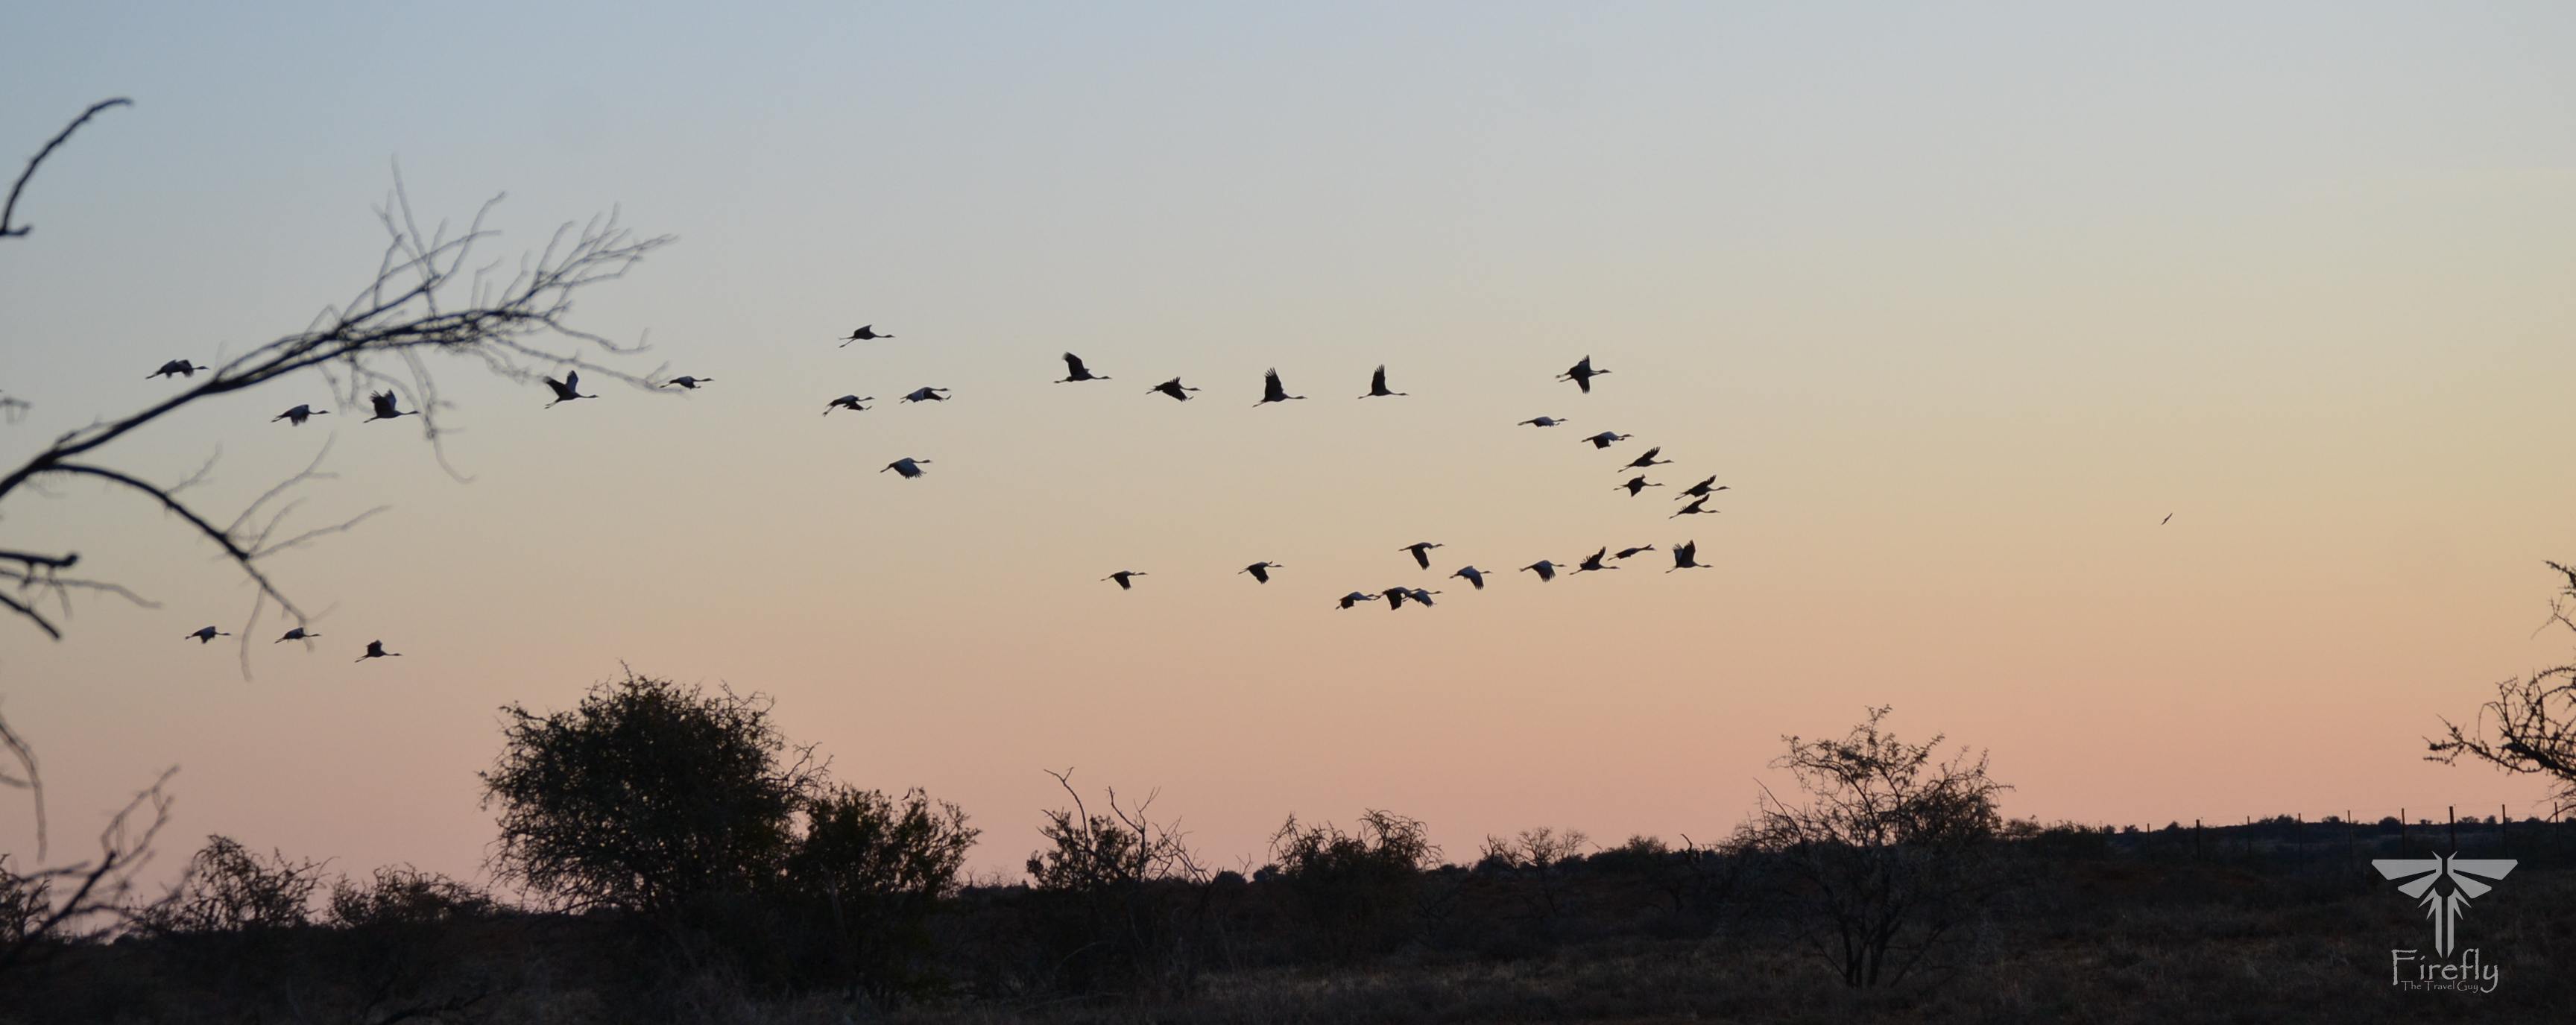 Flight of blue cranes at sunset in the Karoo